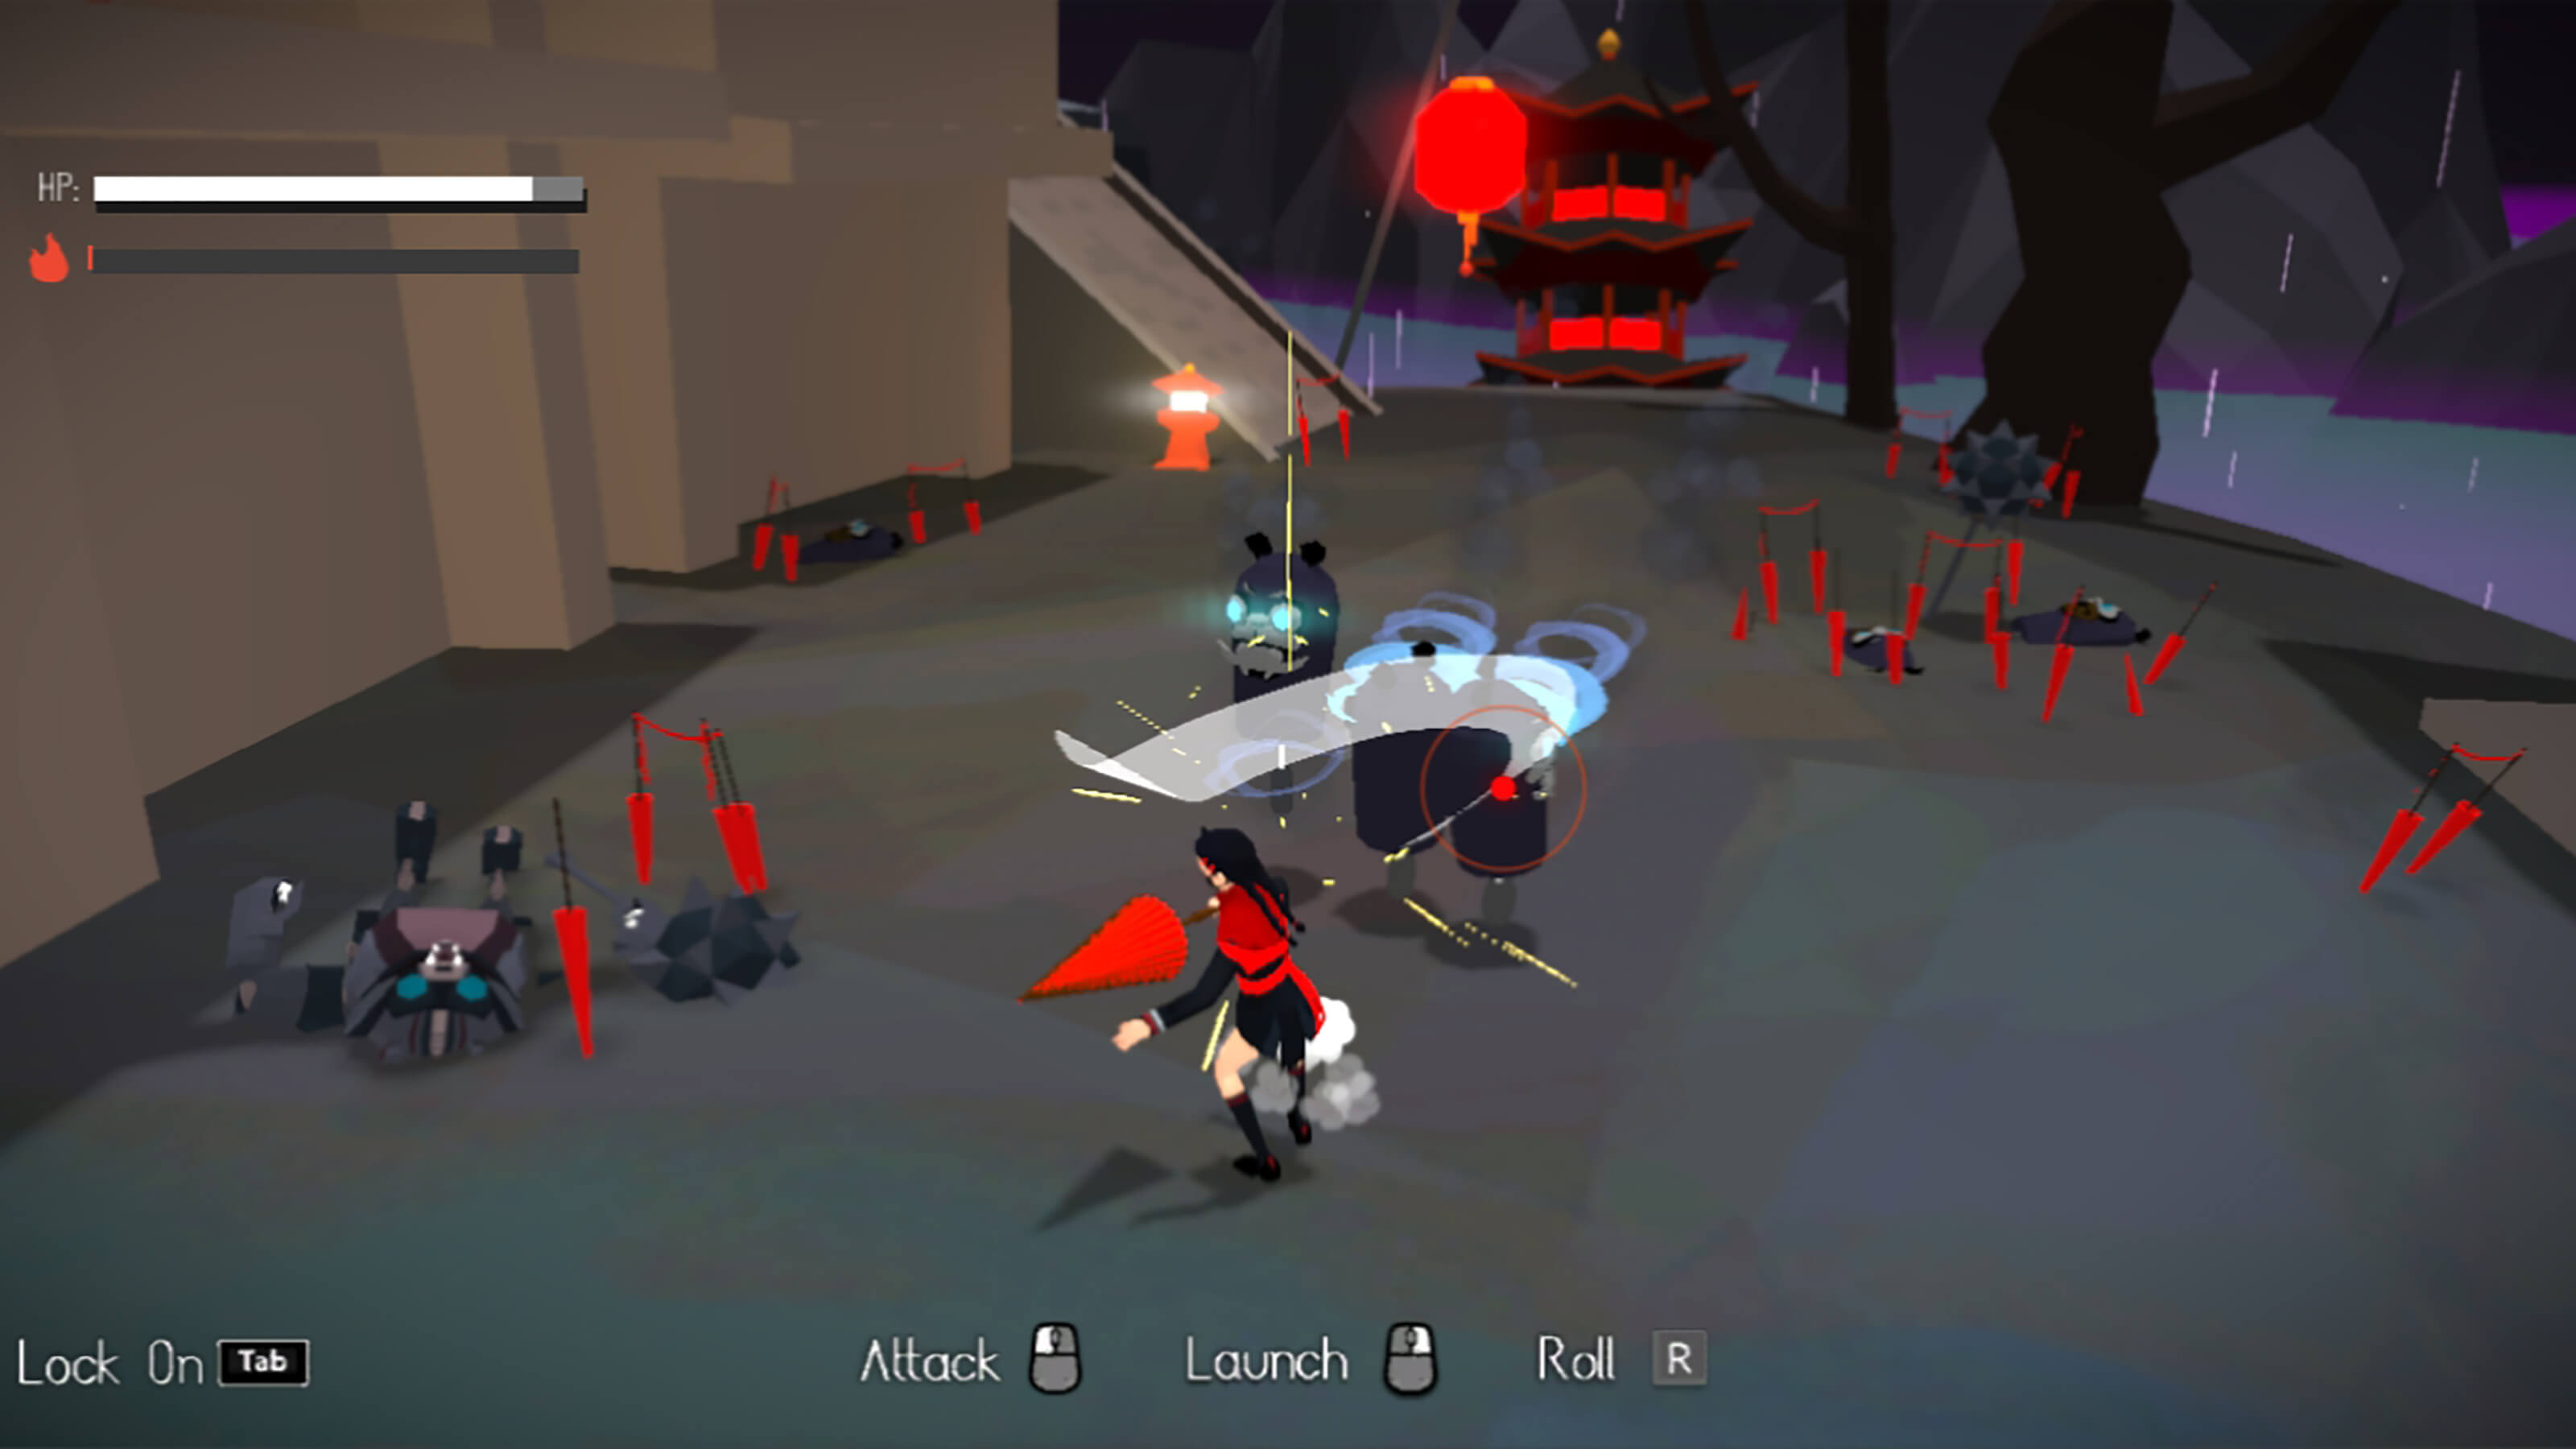 A girl in a red-and-black uniform swats at robotic beasts with her red umbrella on a dark, rainy battlefield.